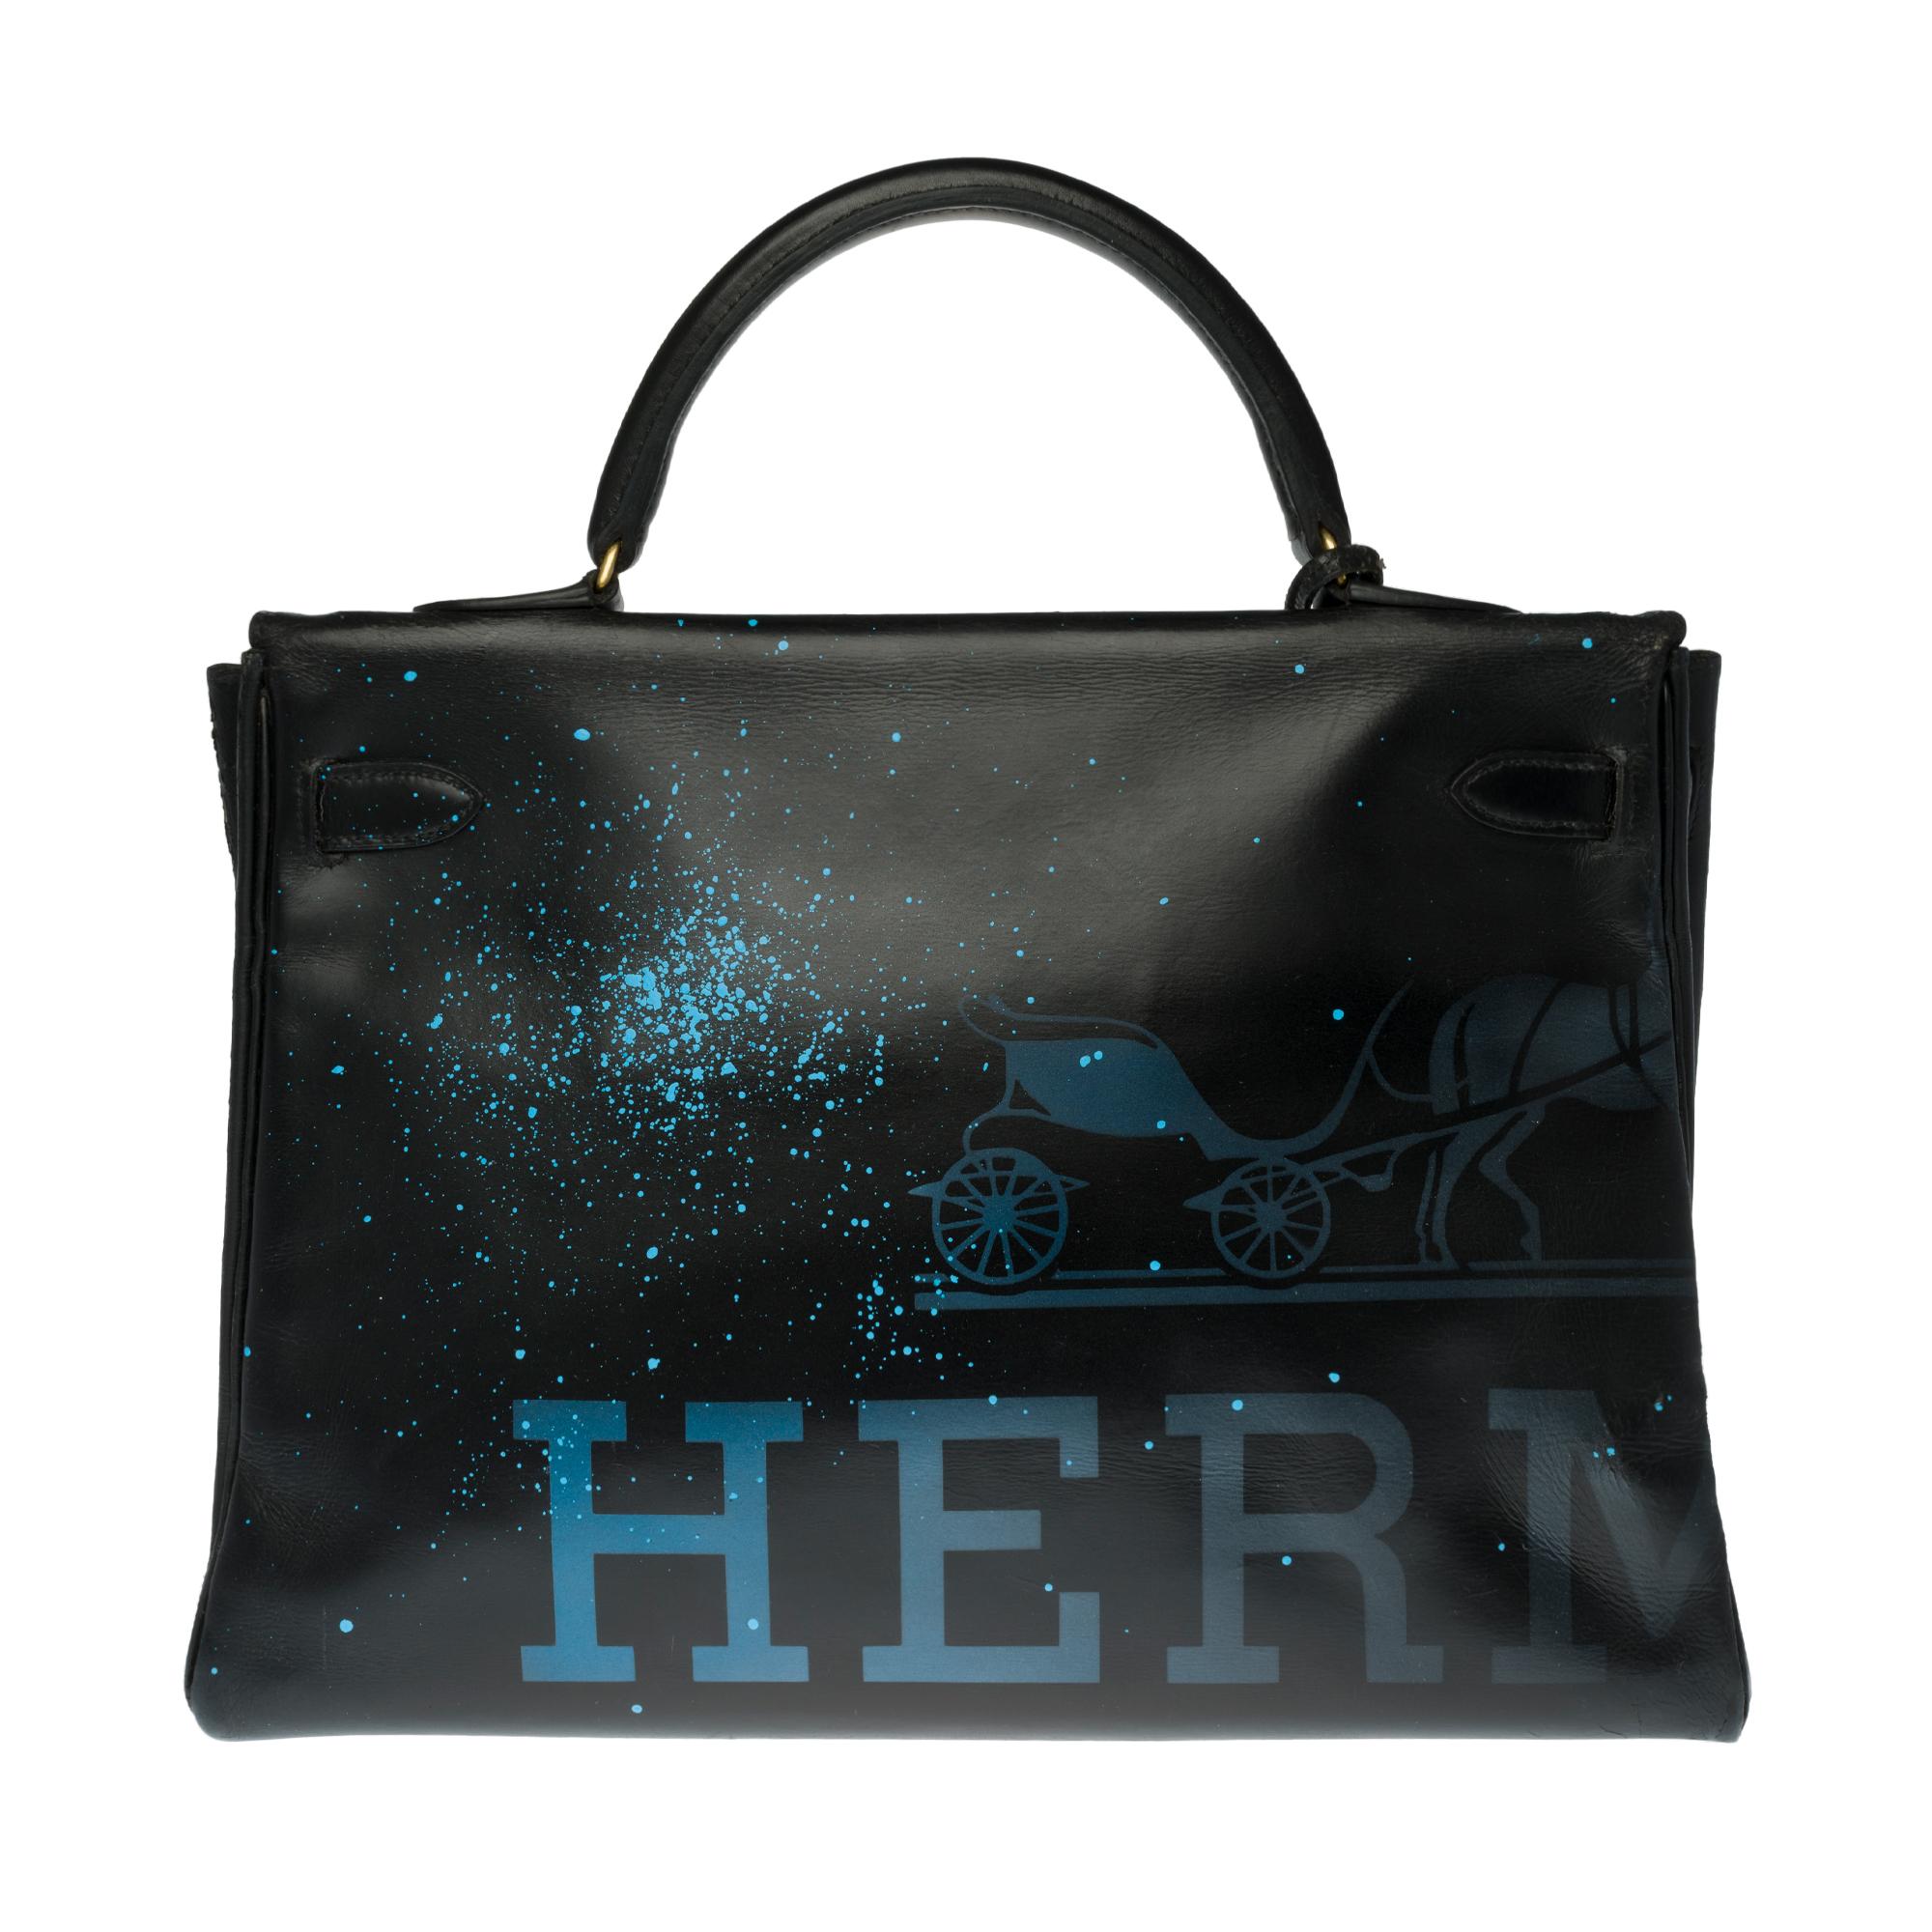 Superb creation on a Hermès Kelly 35 Black Box Leather Bag customized by PatBo artist representing a magnificent image of one of the greatest Hollywood actresses of the 1950s and 1960s; Audrey Hepburn.
Description of bag: Hermès Kelly 35 turned